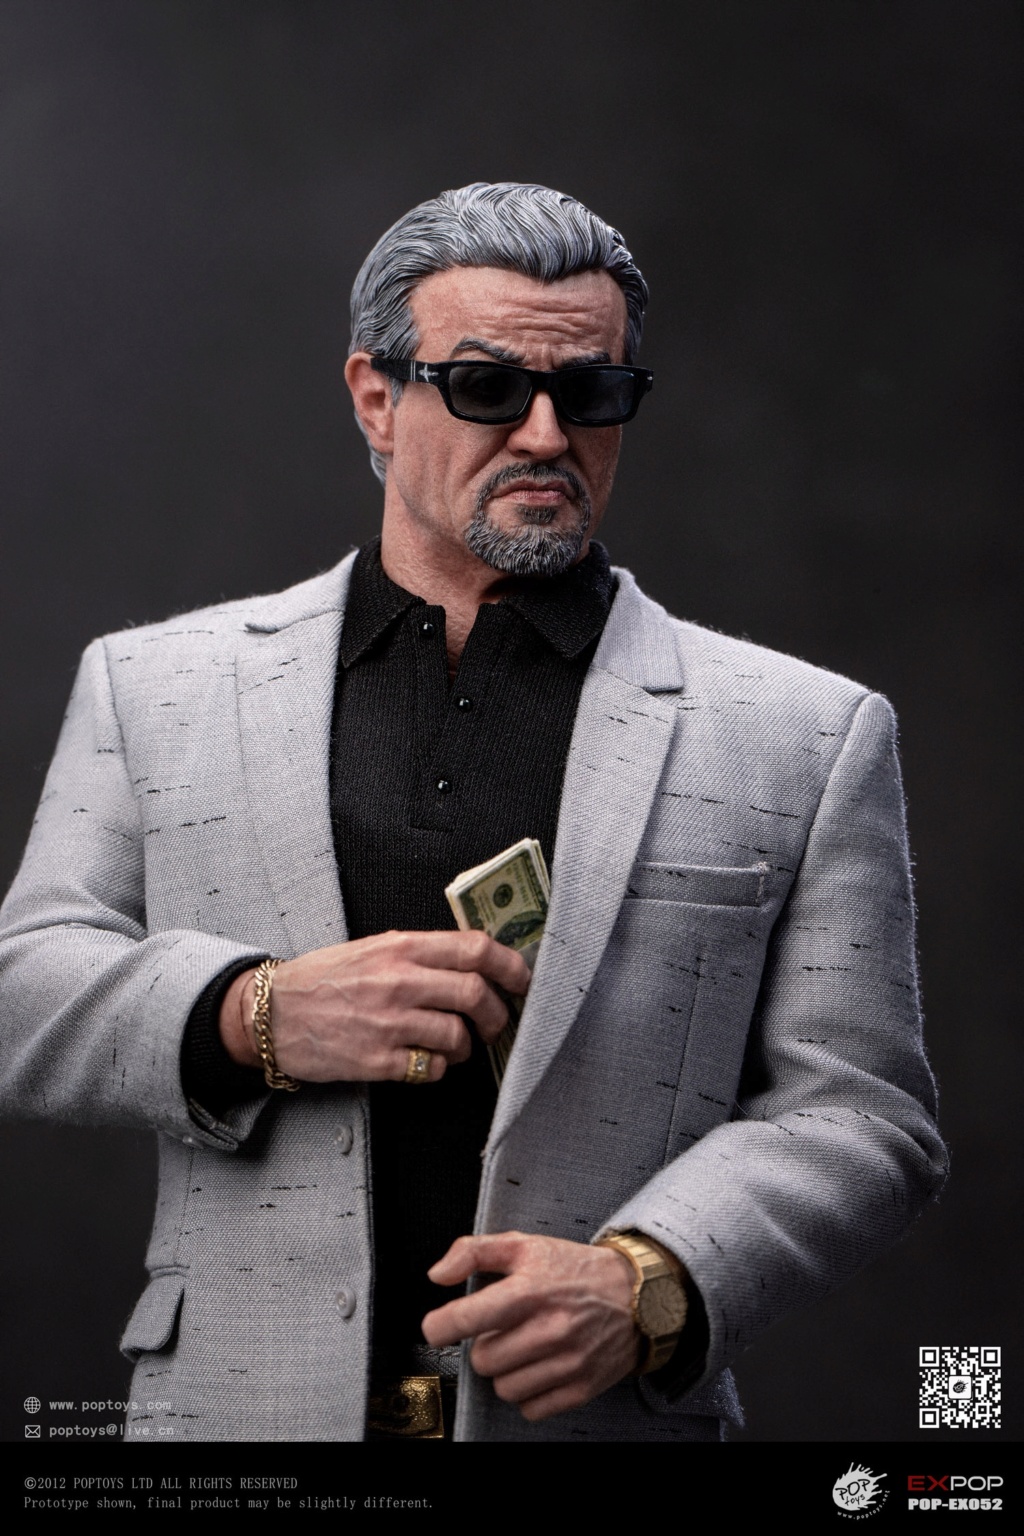 POPTOYS - NEW PRODUCT: POPTOYS: EX052 1/6 Scale The King of Gangs (Tulsa King) 19054110